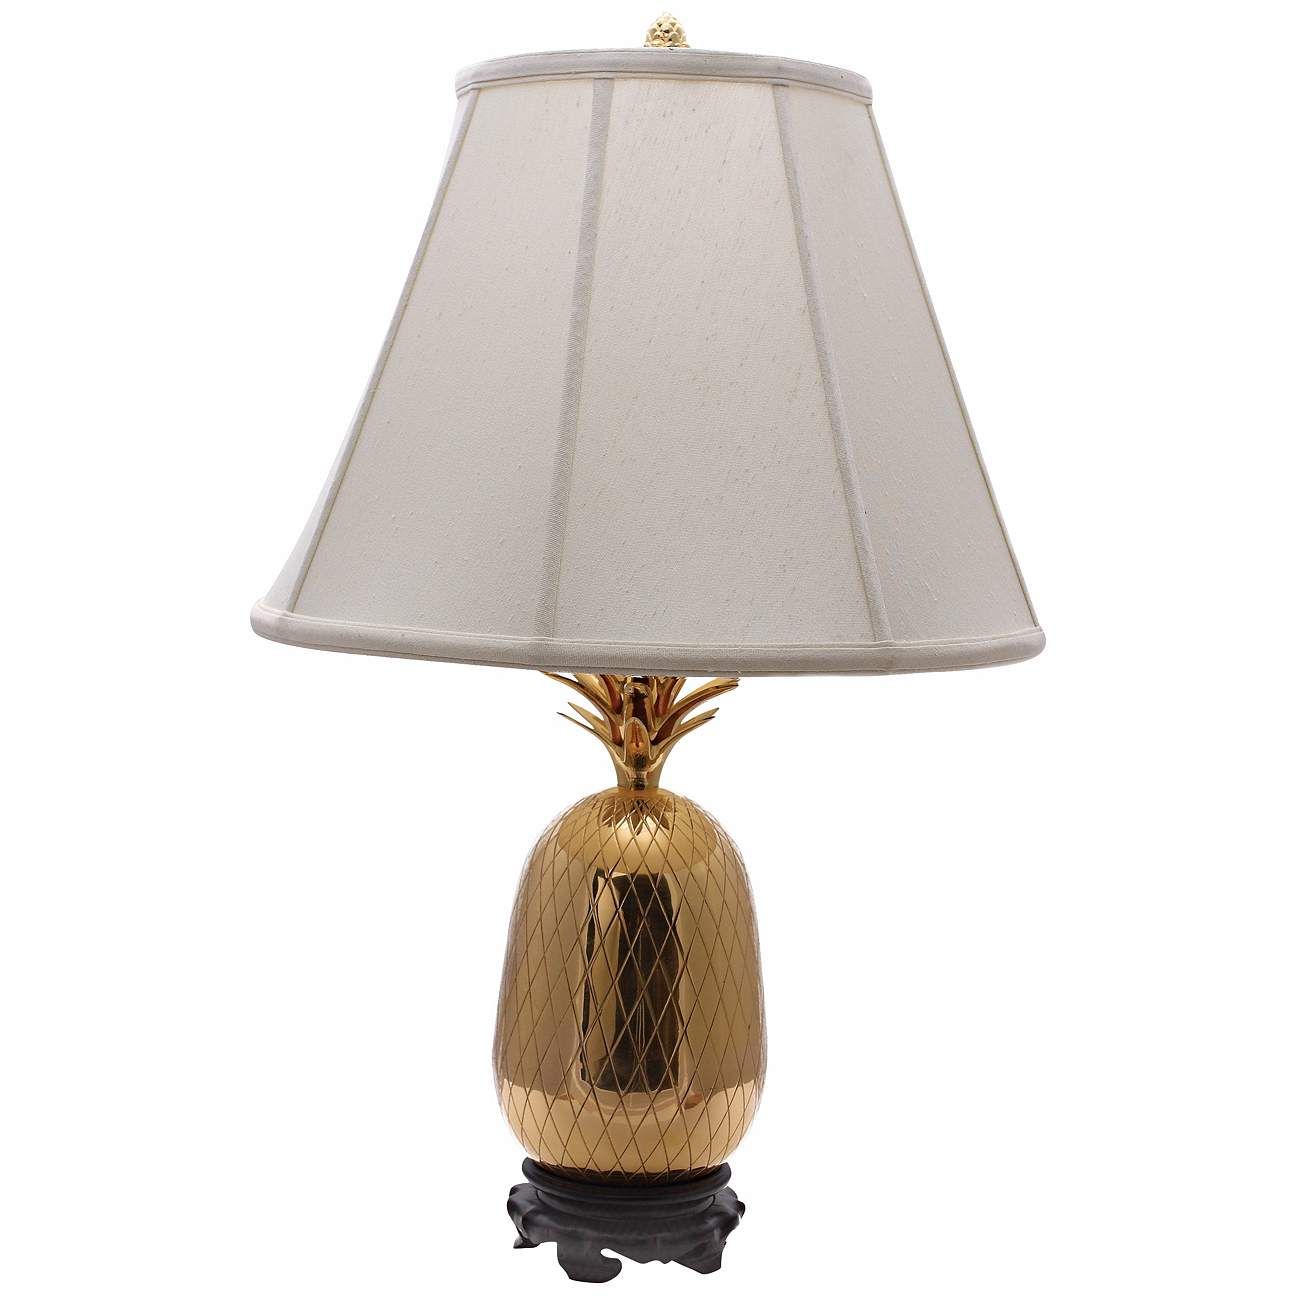 Large Brass Pineapple Table Lamp with White Shade | Lamps Plus